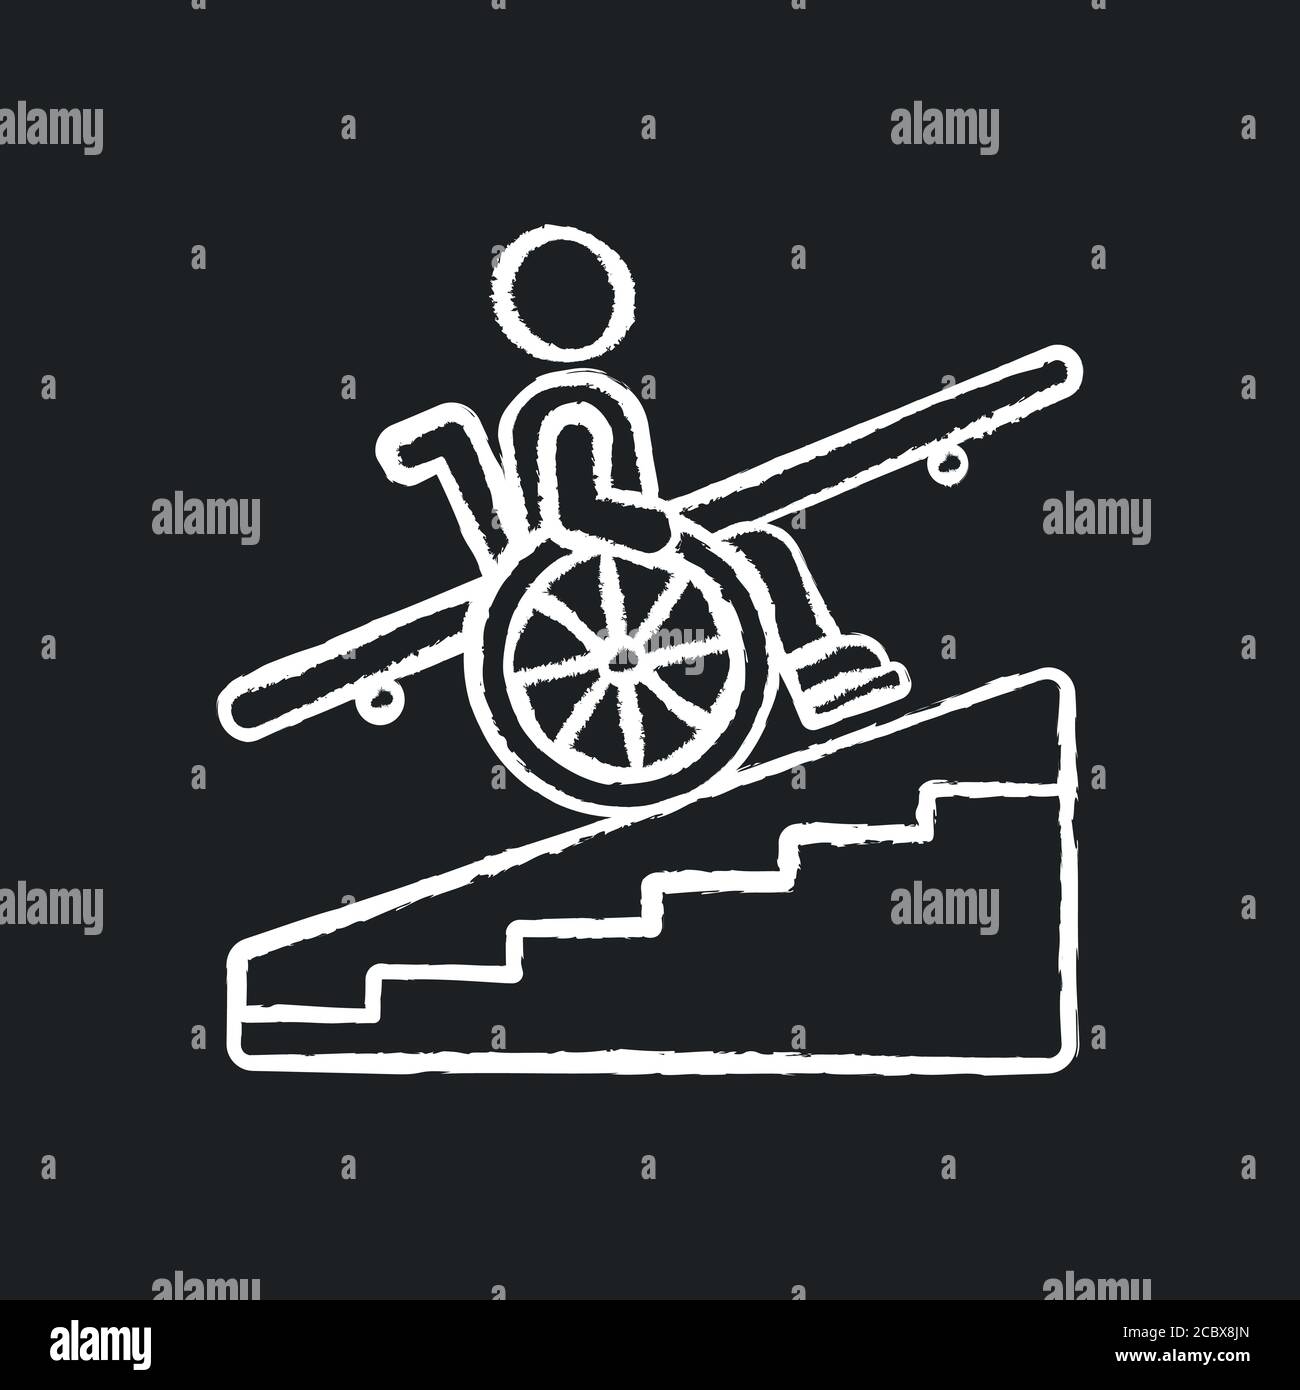 Step free access chalk white icon on black background. Wheelchairs and strollers access. Avoiding stairs. Accessible transportation. City infrastructu Stock Vector